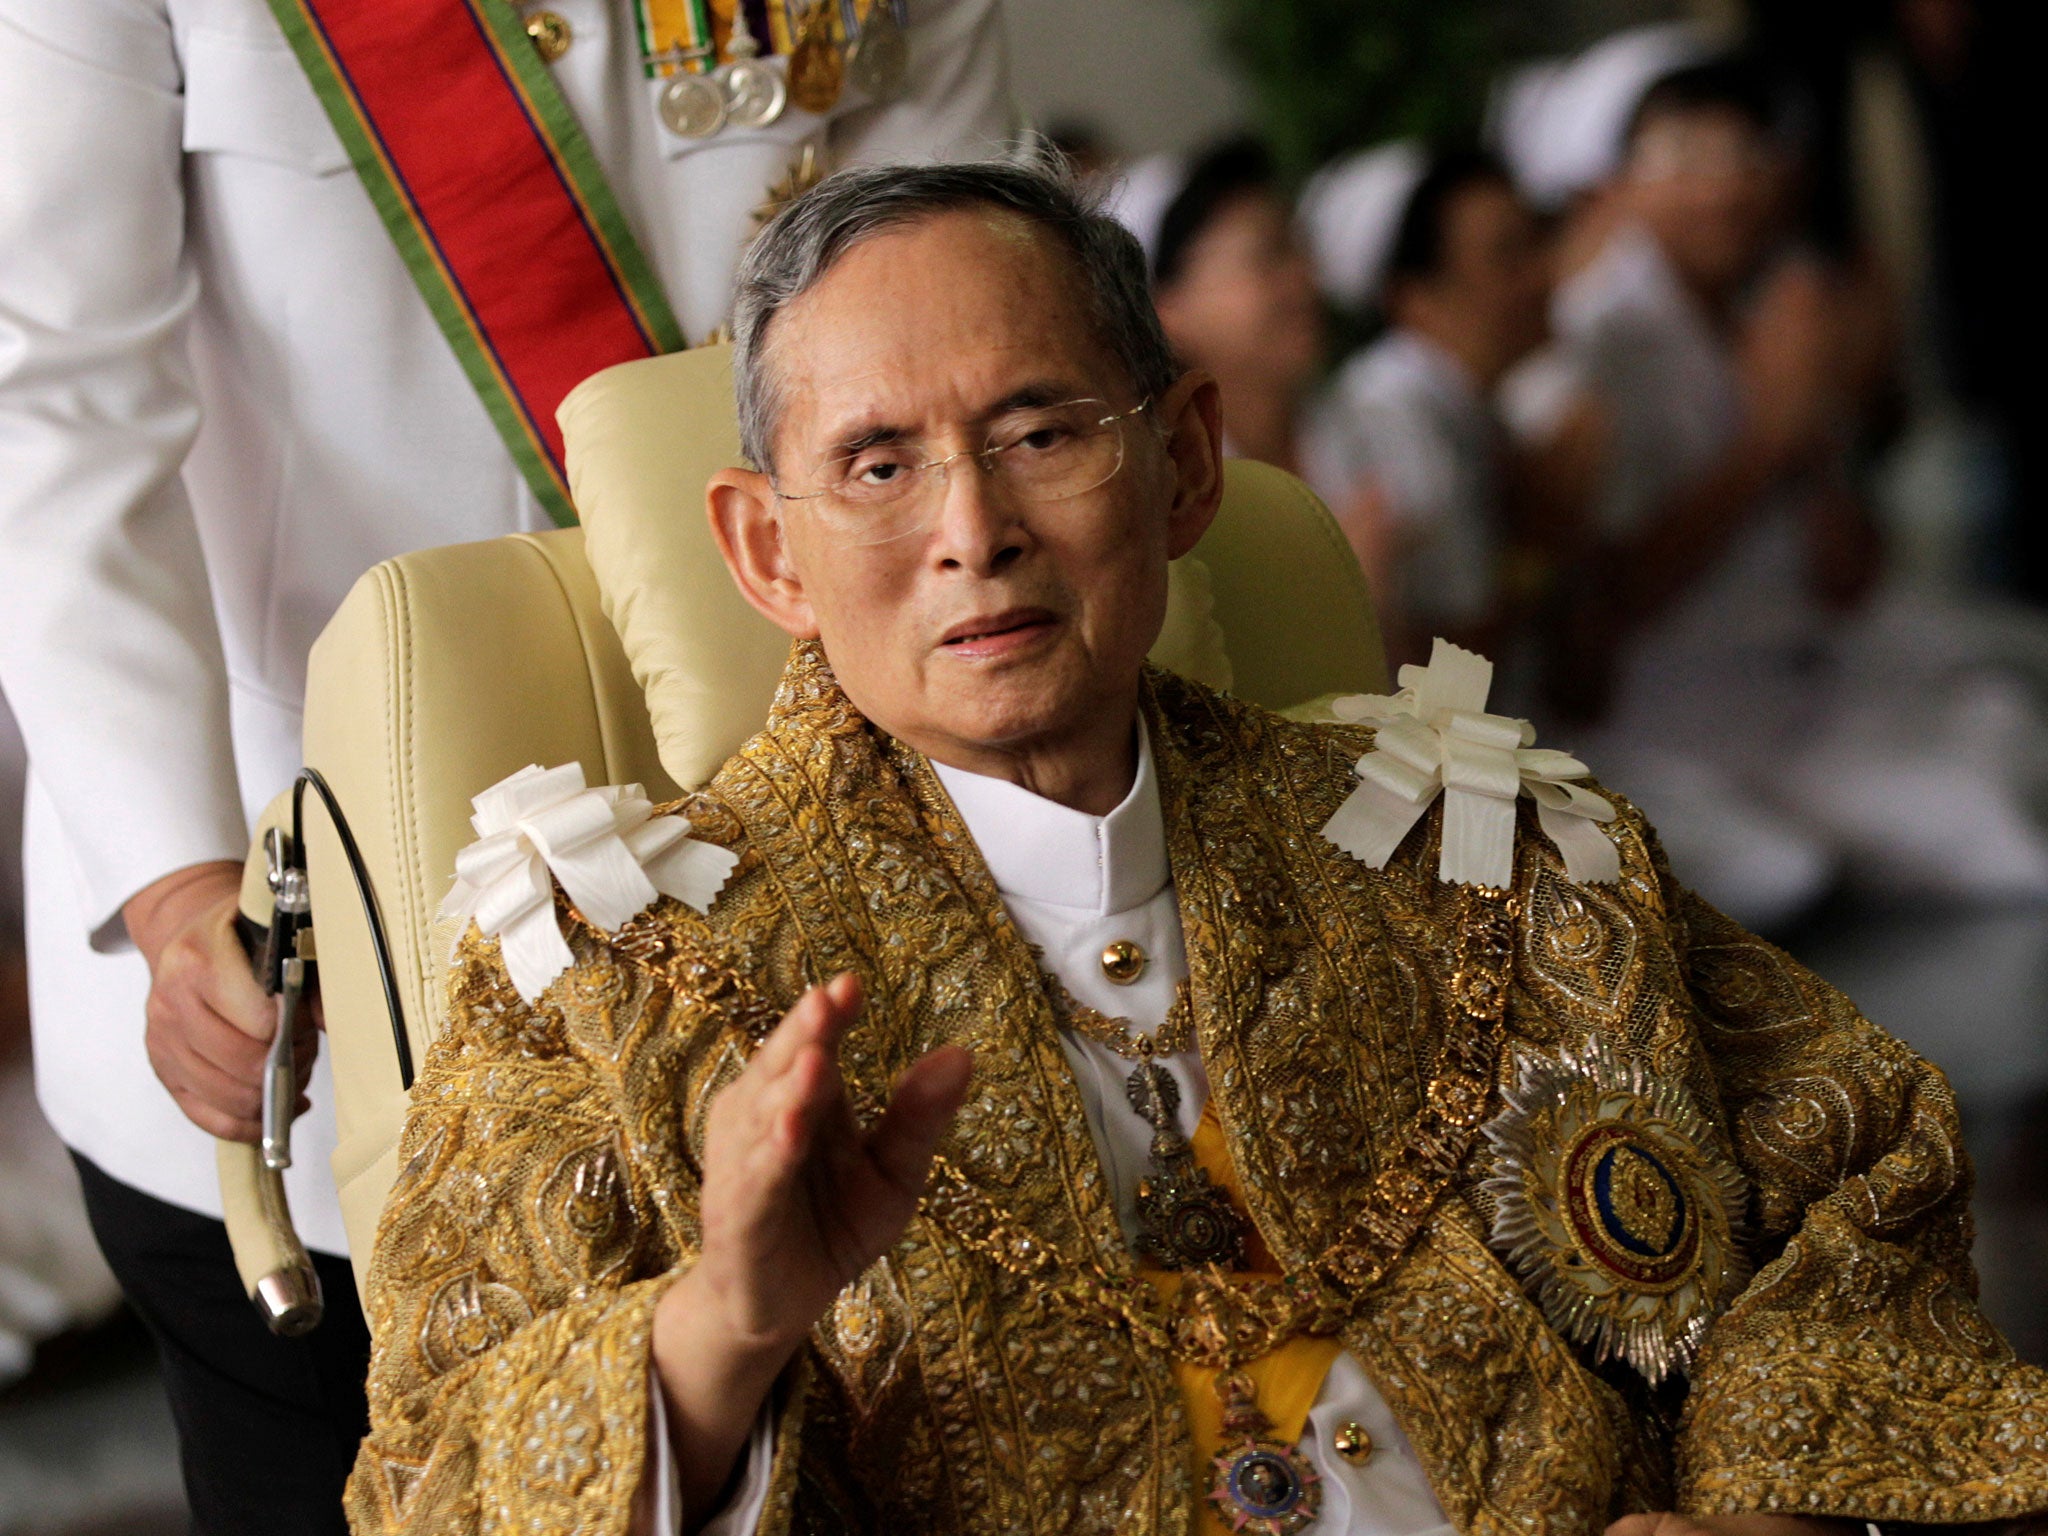  King Bhumibol Adulyadej attends a ceremony at the Grand Palace in Bangkok in 2010